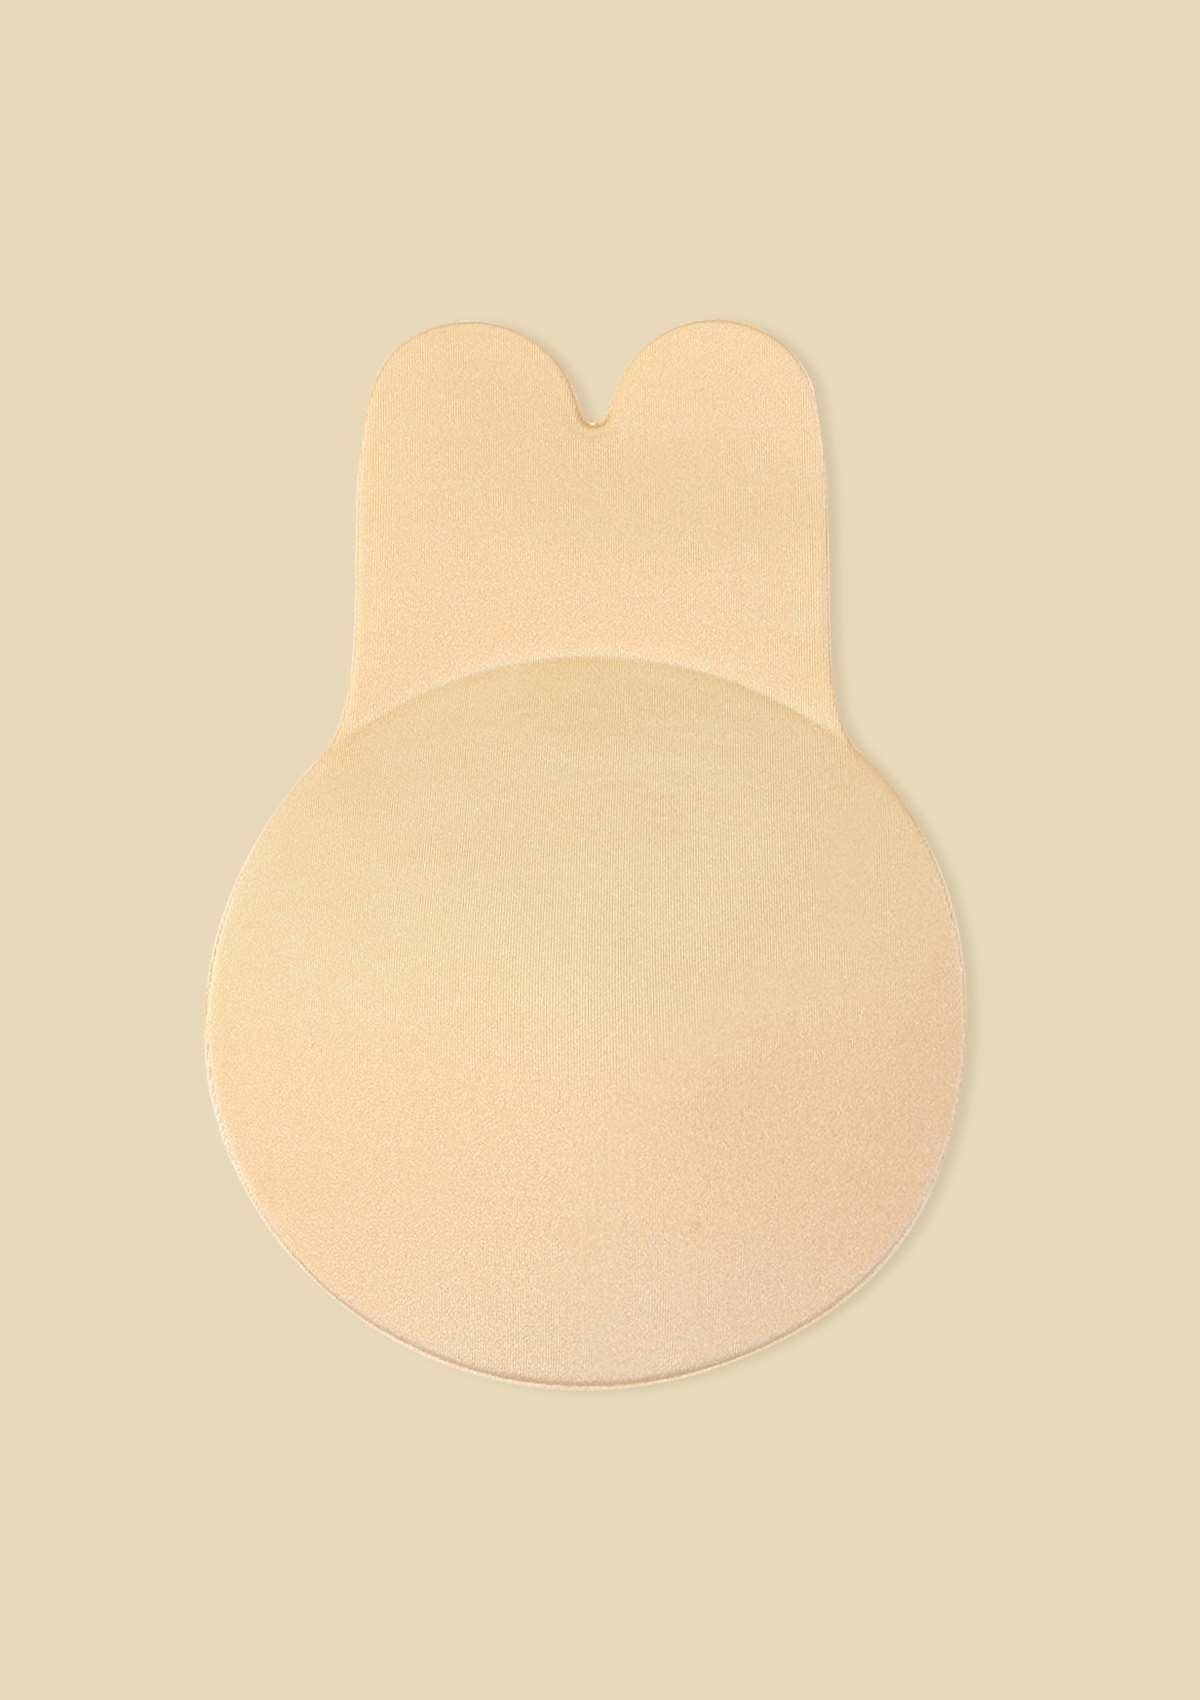 Shop Generic Breast Lifter Push Up Silicone Nipple Cover - 6.5 cm